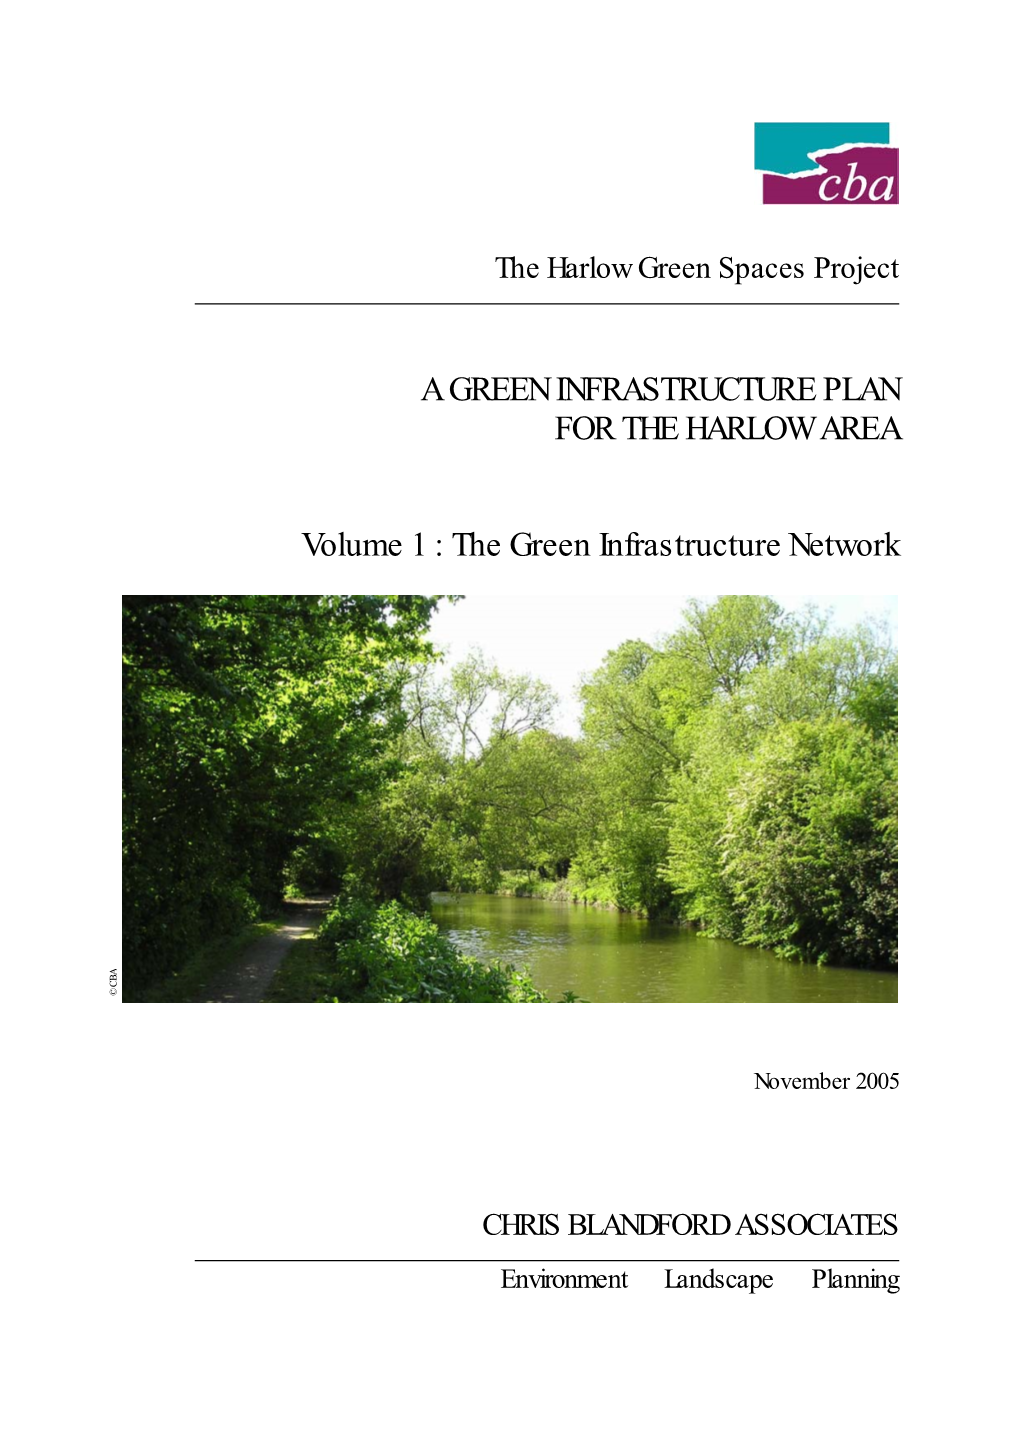 Green Infrastructure Plan for the Harlow Area